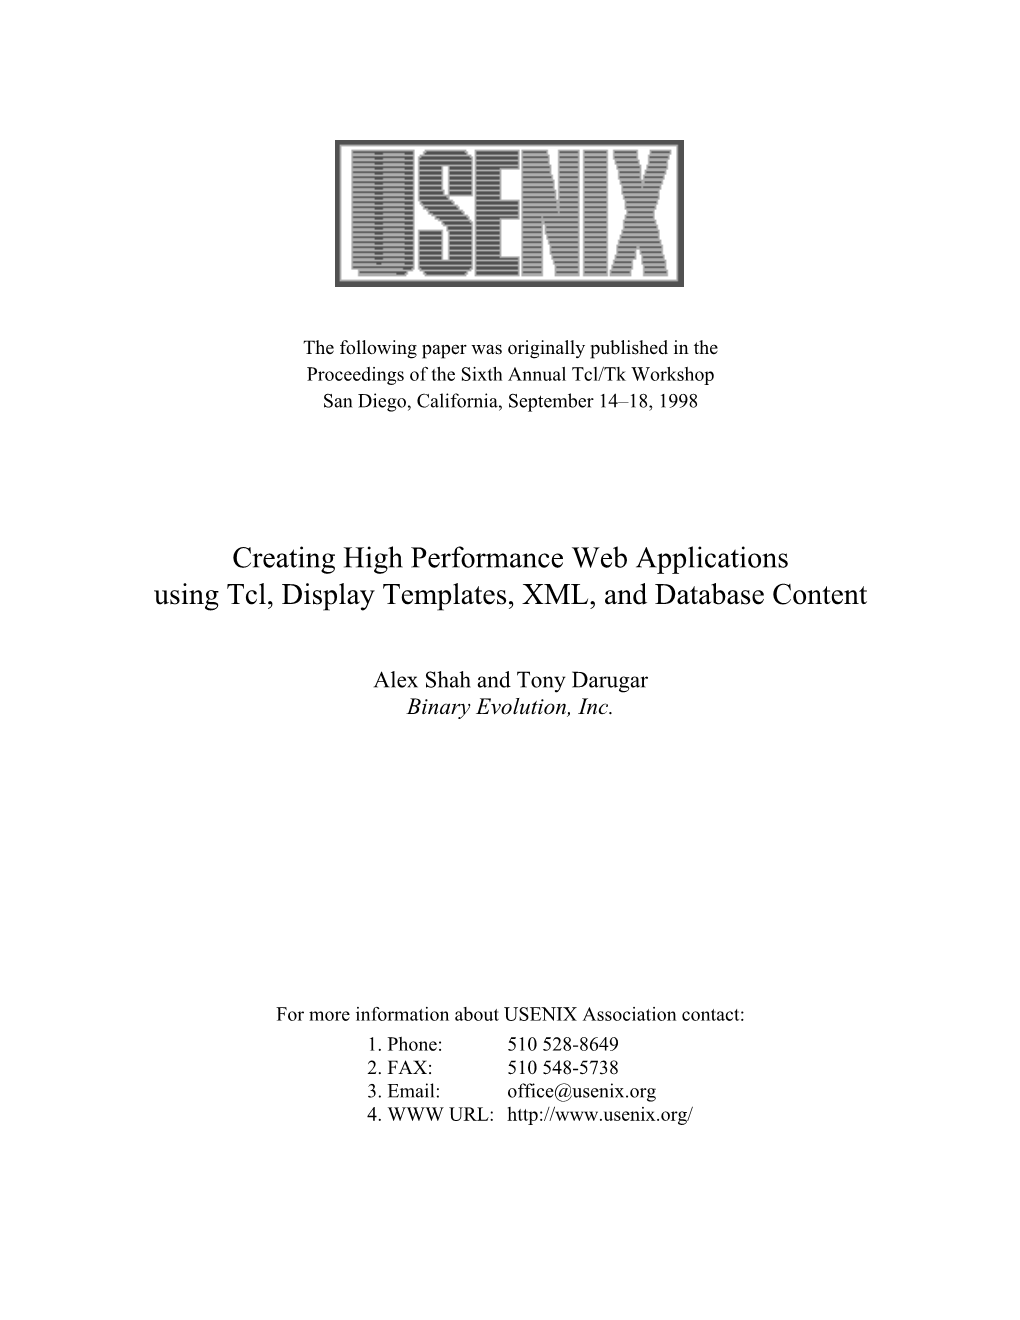 Creating High Performance Web Applications Using Tcl, Display Templates, XML, and Database Content